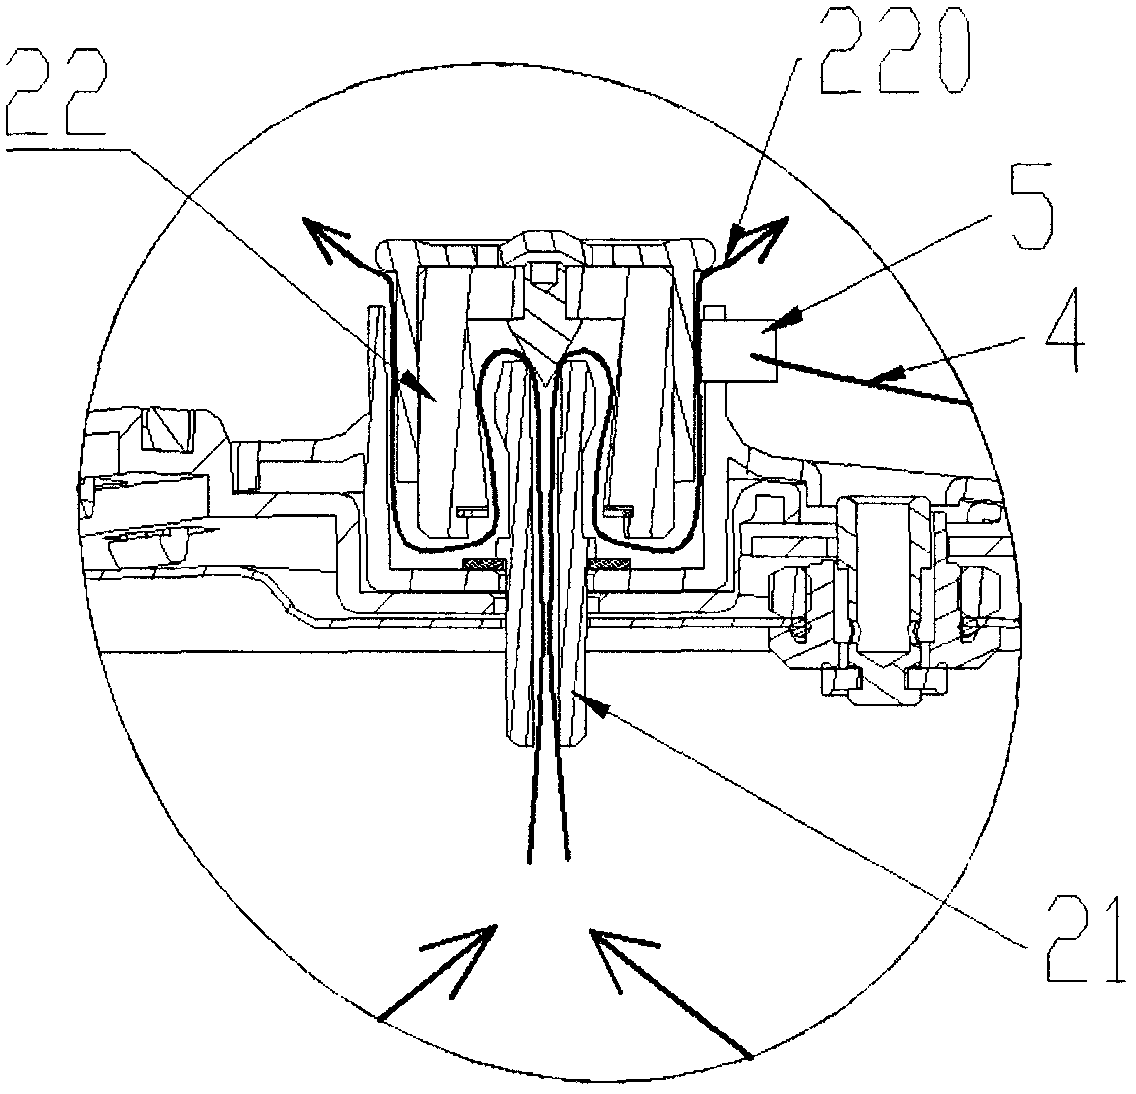 Novel measuring and controlling device of electric pressure cooker